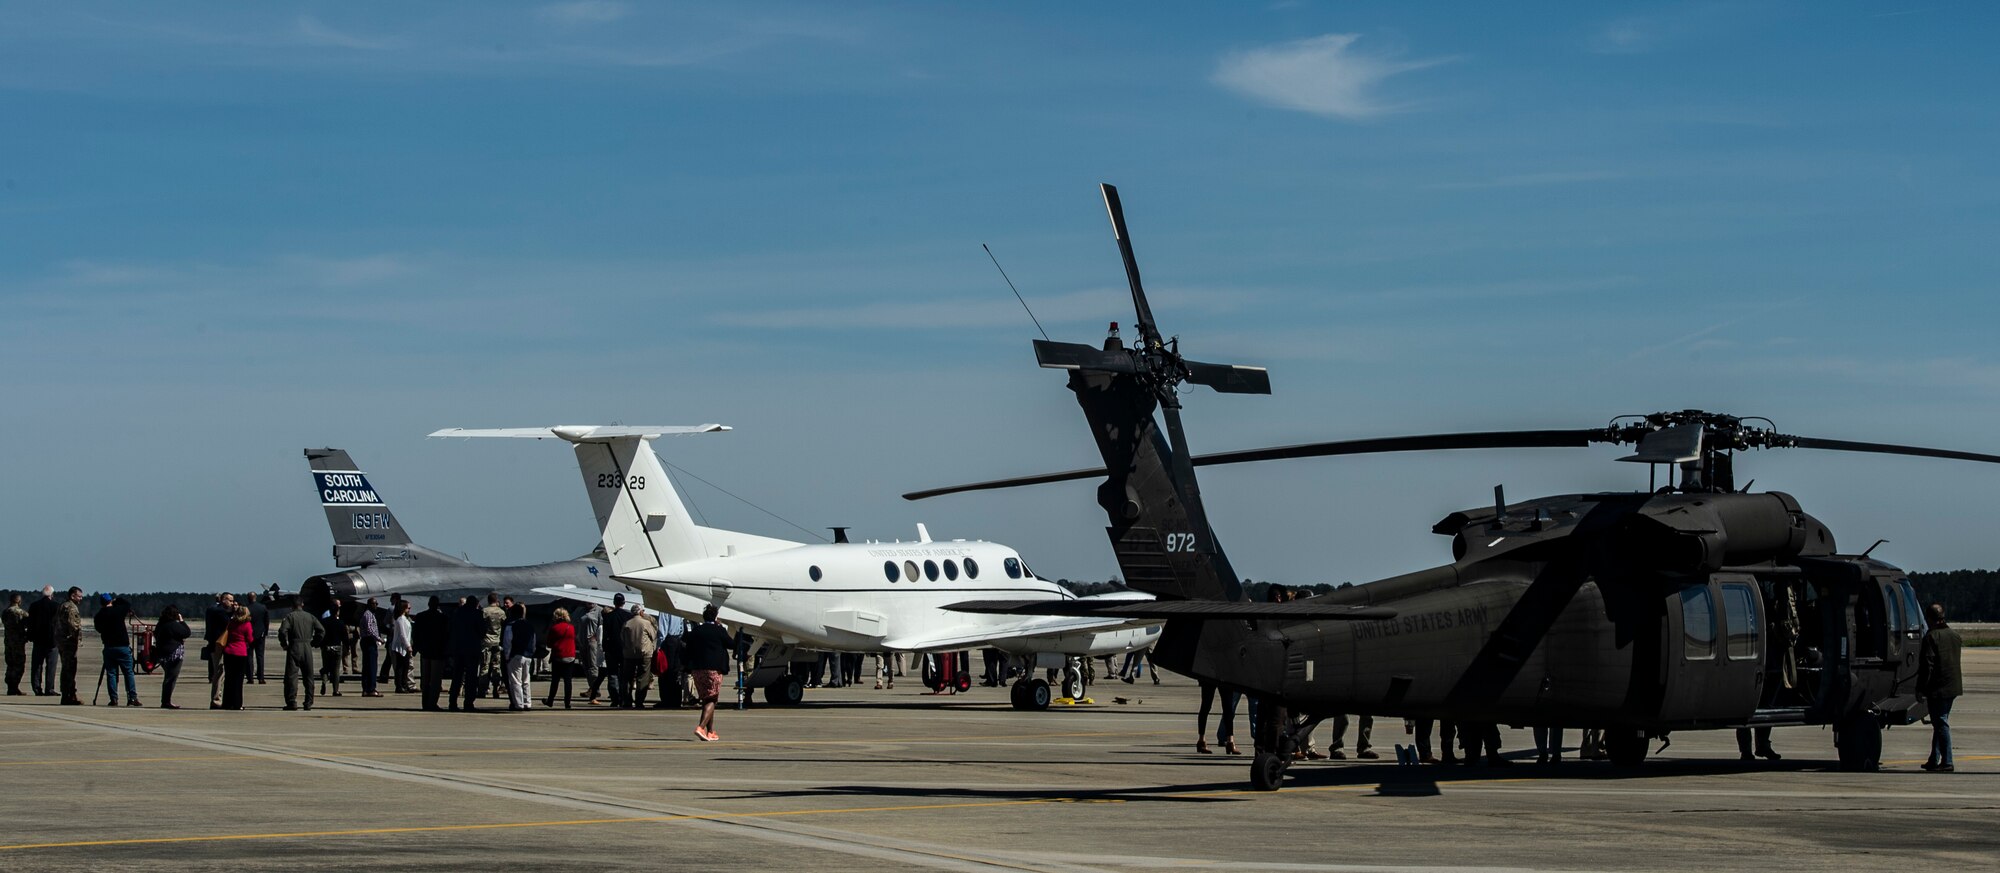 Operation Palmetto Employment participants view various aircraft static displays at Shaw Air Force Base, S.C., March 12, 2019.